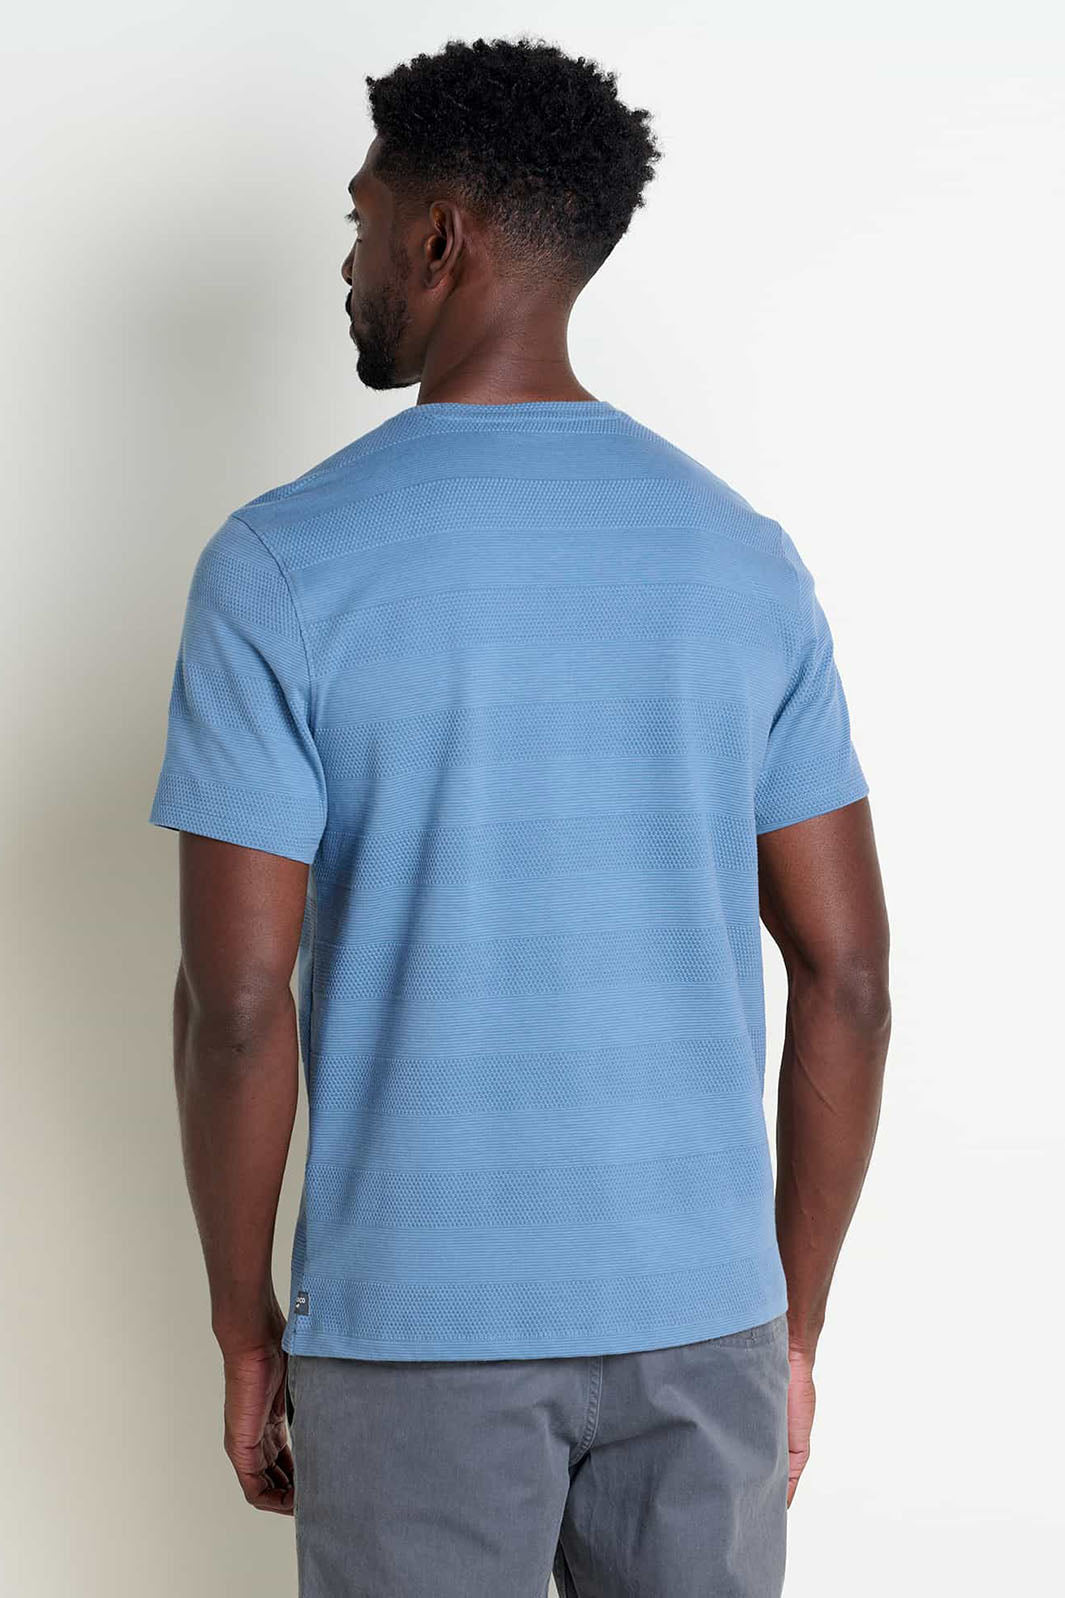 Tempo Dobby Crew T-Shirt - Pacific Blue